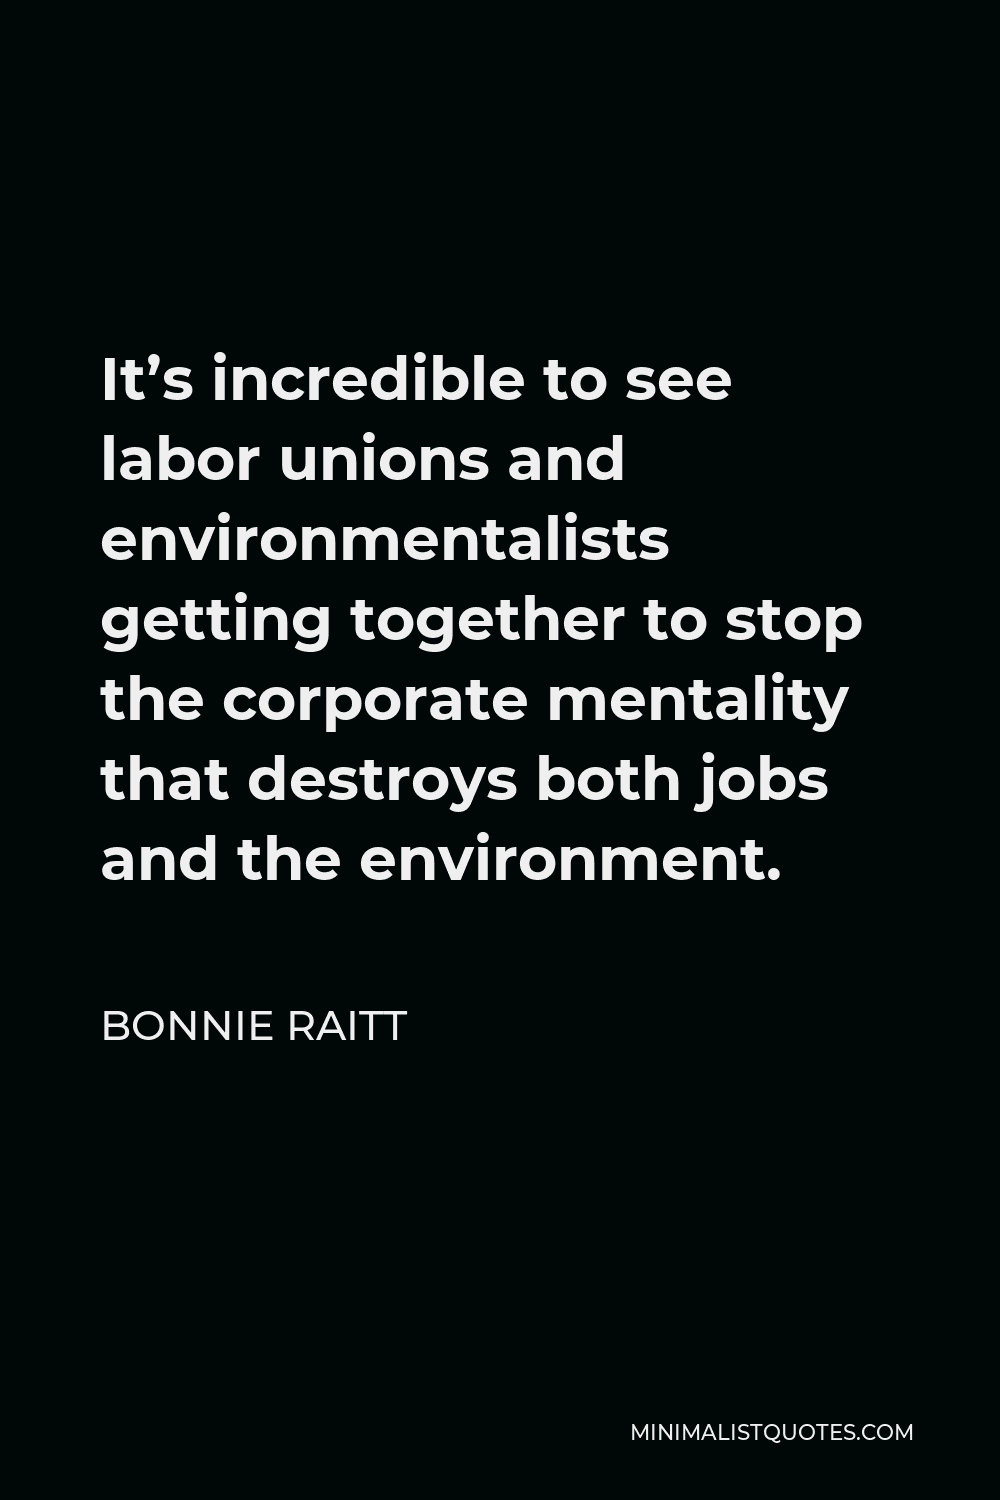 Bonnie Raitt Quote - It’s incredible to see labor unions and environmentalists getting together to stop the corporate mentality that destroys both jobs and the environment.